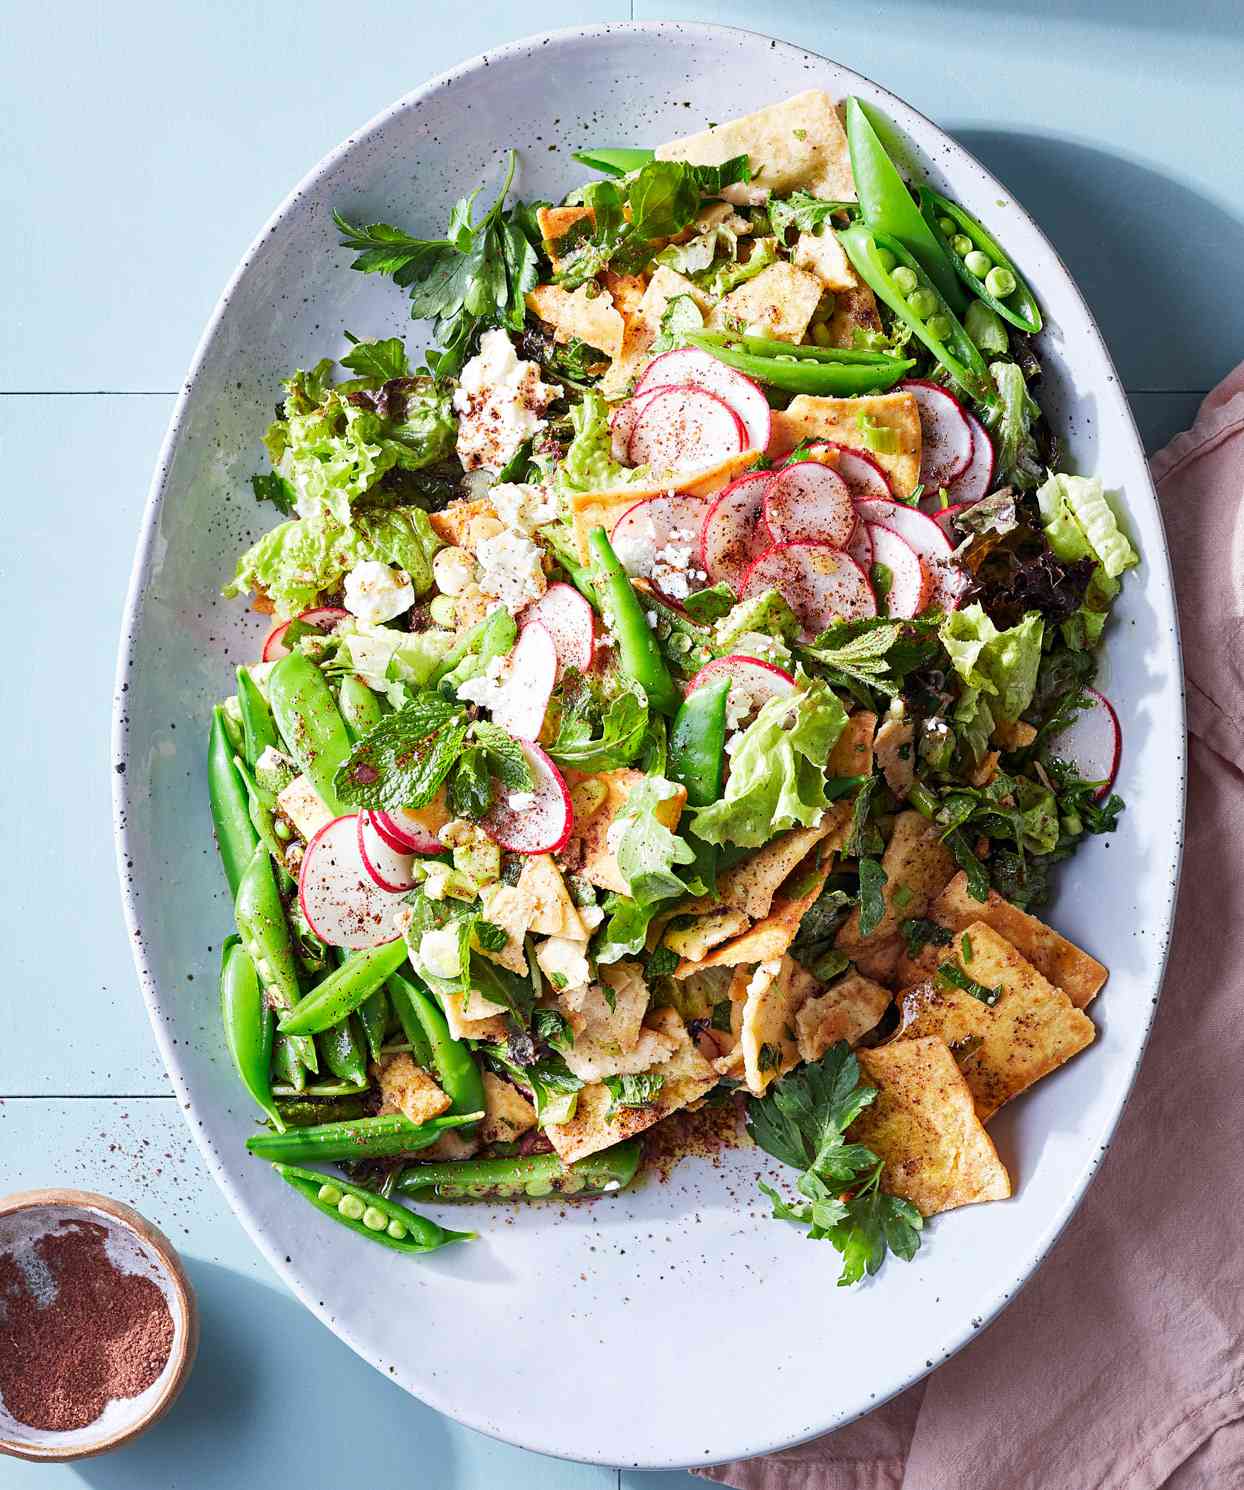 <p>Popular in Lebanon and Israel, fattoush is a crunchy, lemony salad of toasted pita, herbs and vegetables. This  quick version showcases spring vegetables like snap peas and radishes. It's seasoned with sumac, which has a distinctly sour, earthy flavor. Find it in Middle Eastern markets or online.</p>
                          